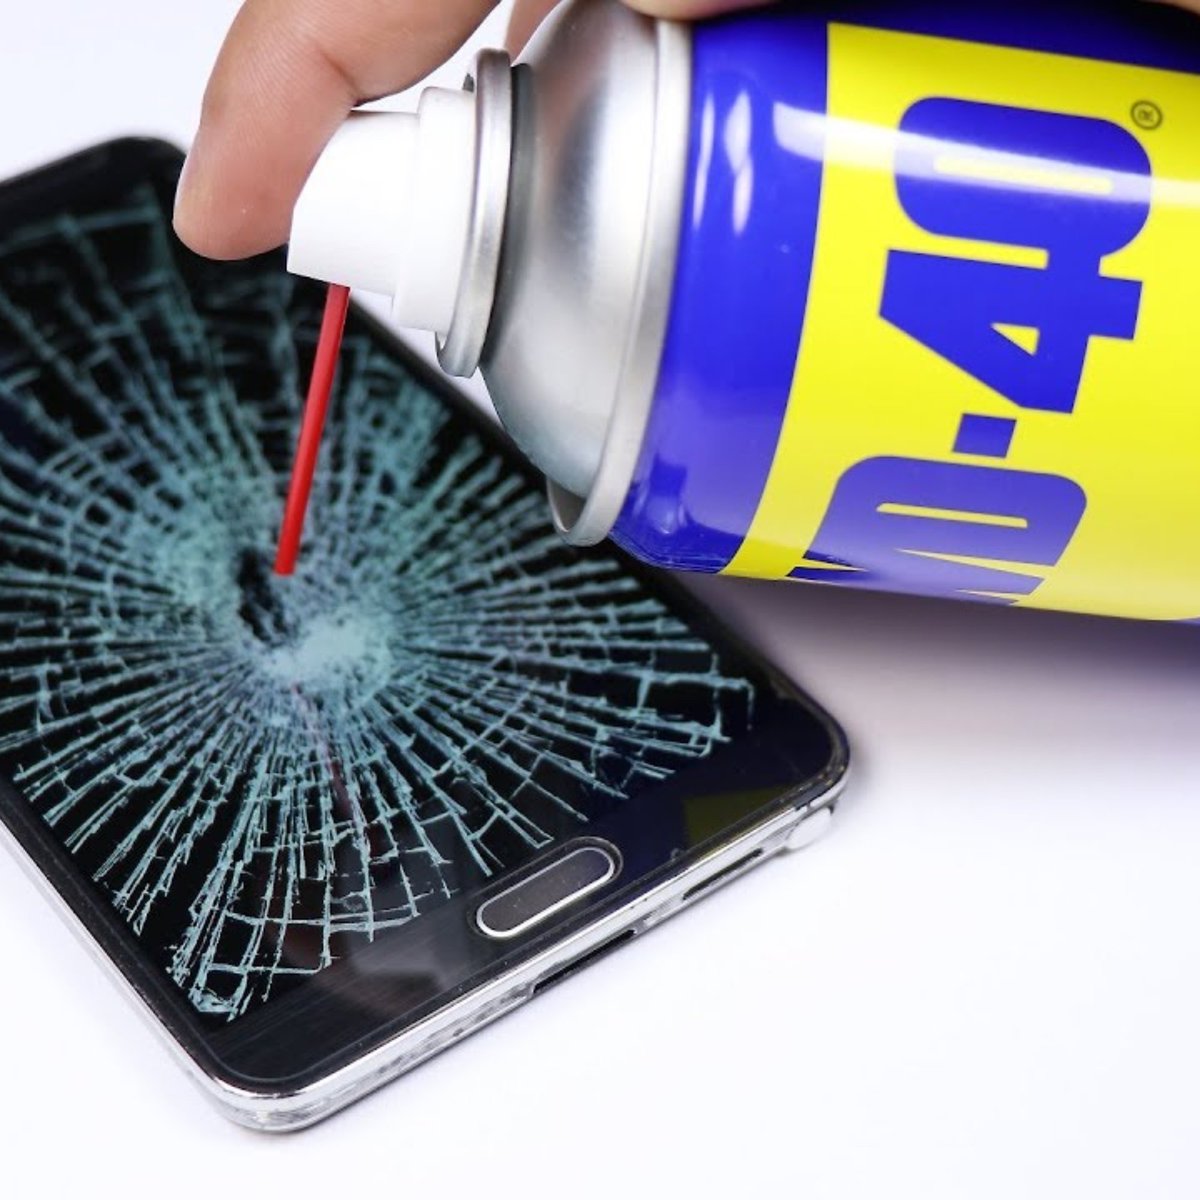 When it comes to WD40, many people are sure to have heard of it; but if asked what all the uses of WD40 are, many probably wouldn't know. Useful WD-40 Tricks That Actually Work travelerdoor.com/2020/05/17/wd4…